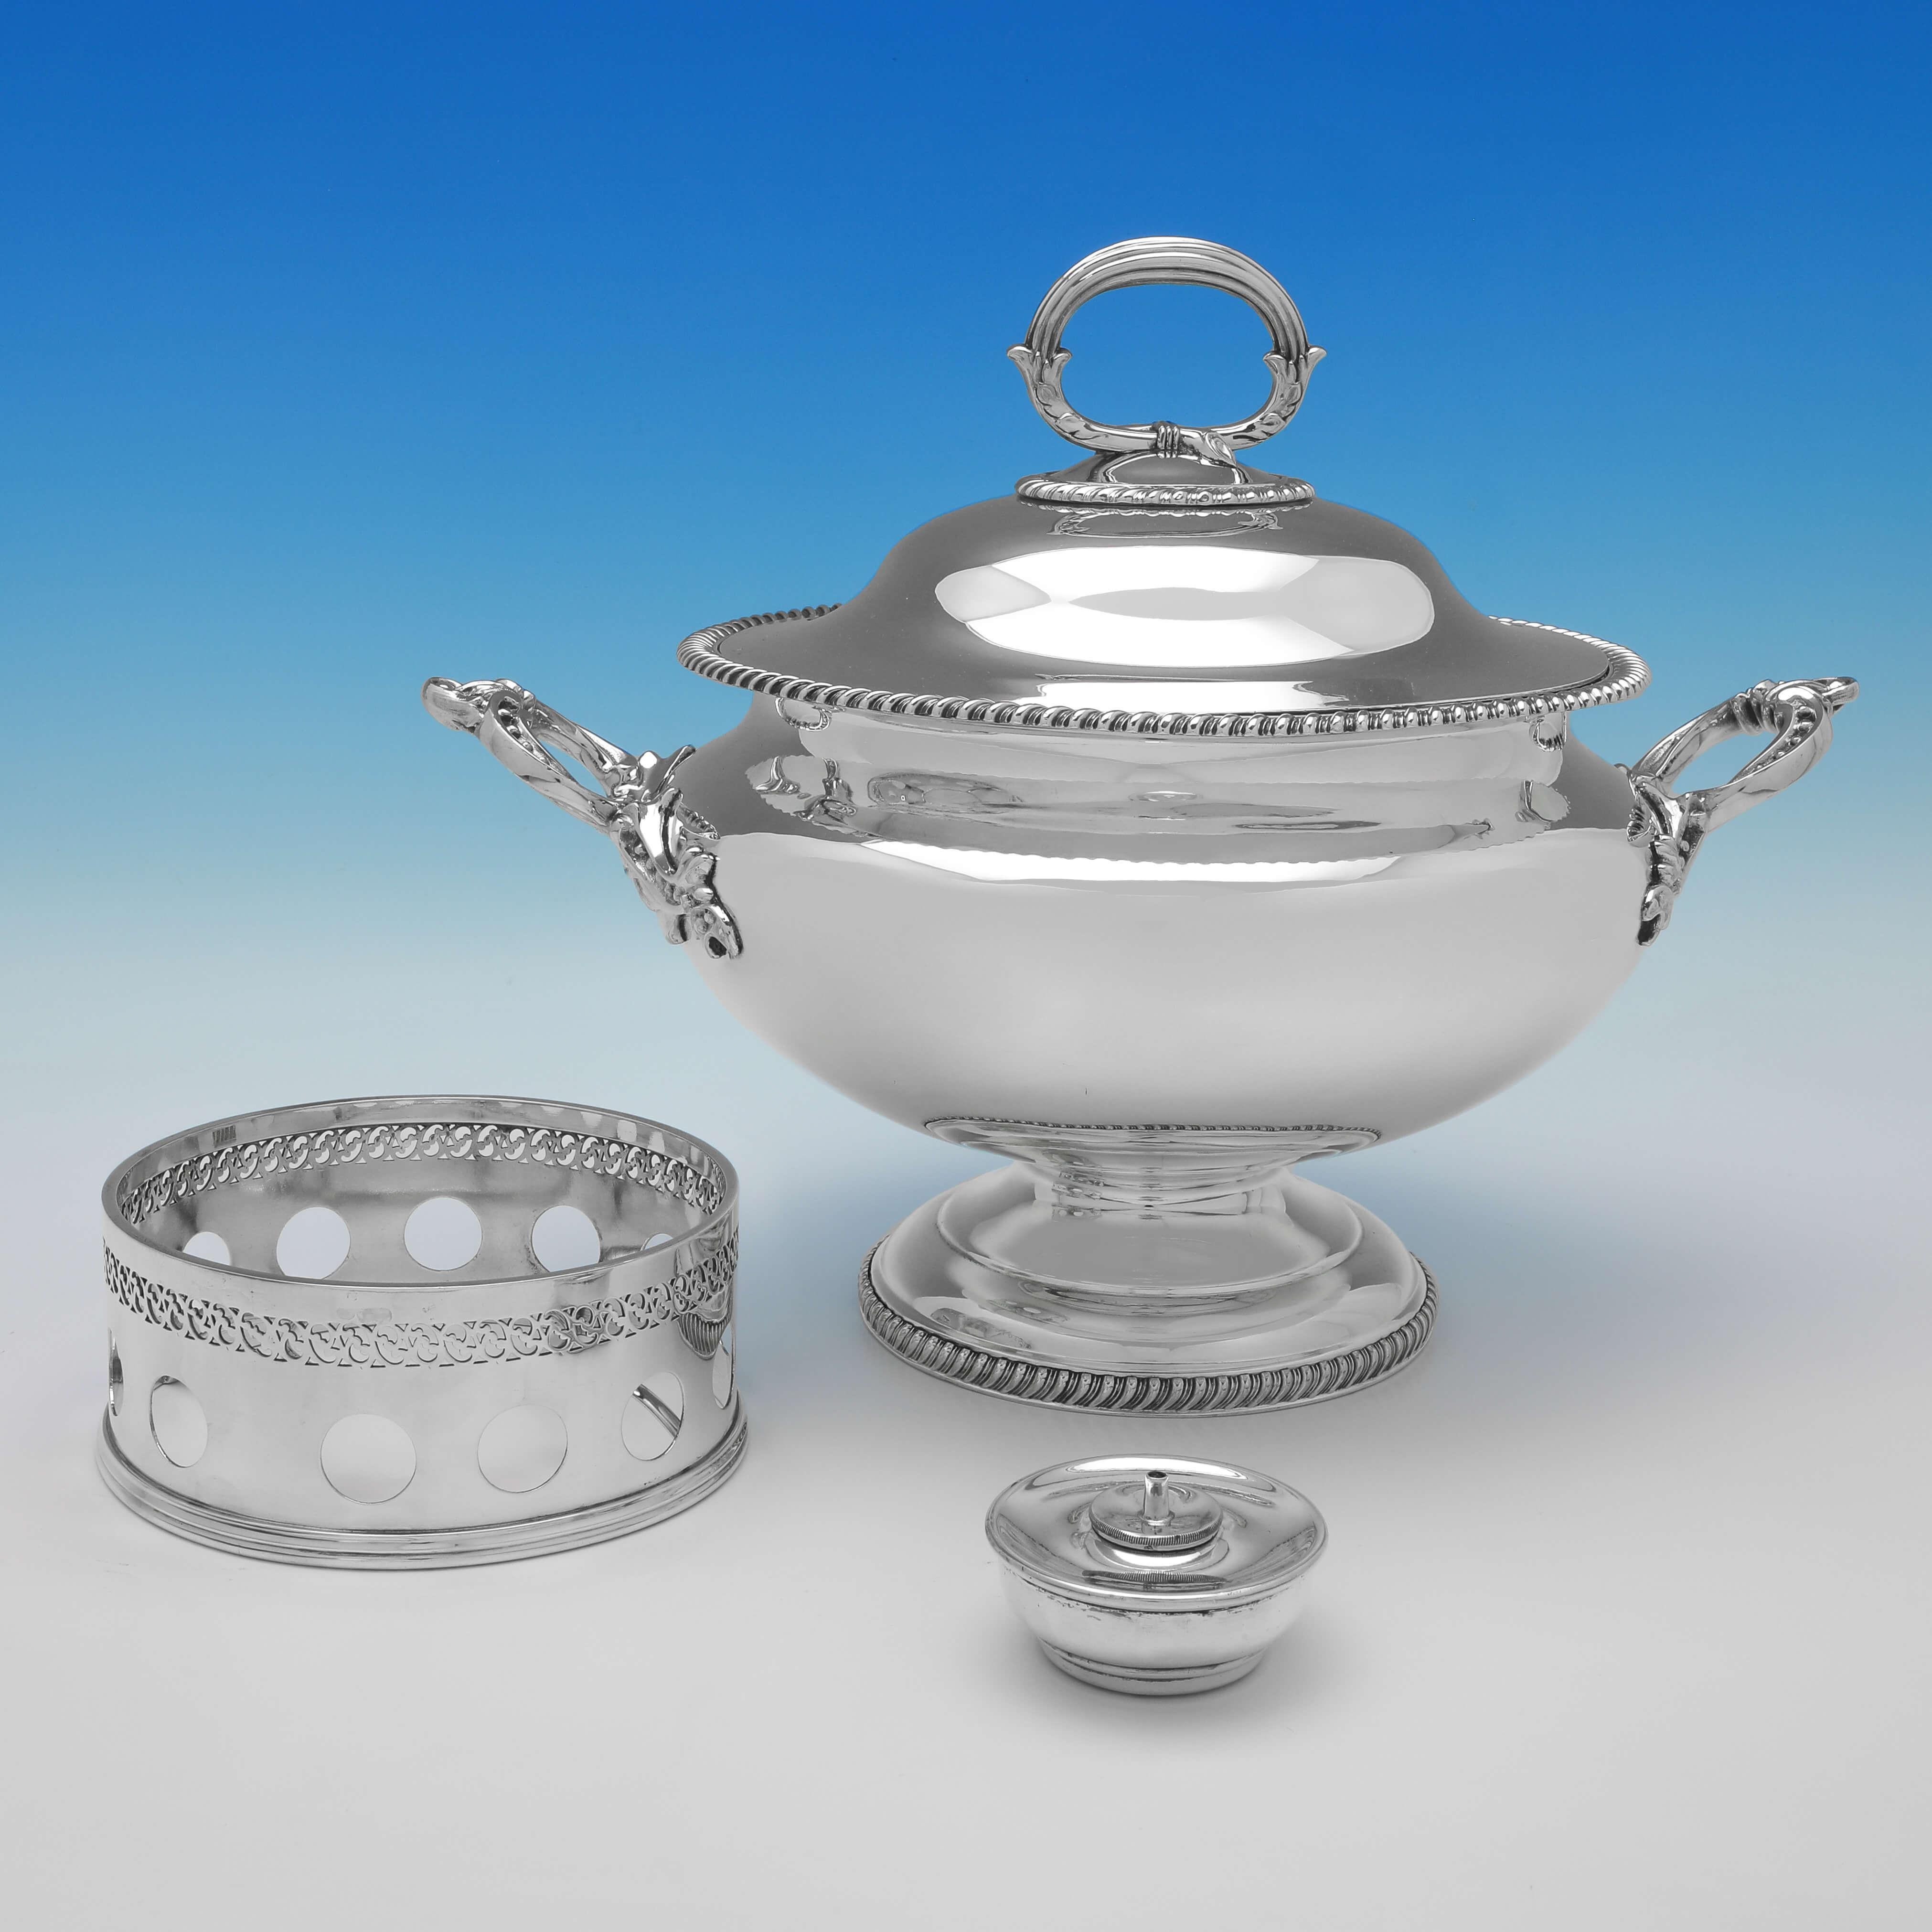 Made in London circa 1880, this handsome, Antique Silver Plate Soup Tureen, stands on a removable base with a heater to keep the soup warm. 

The soup tureen measures 15